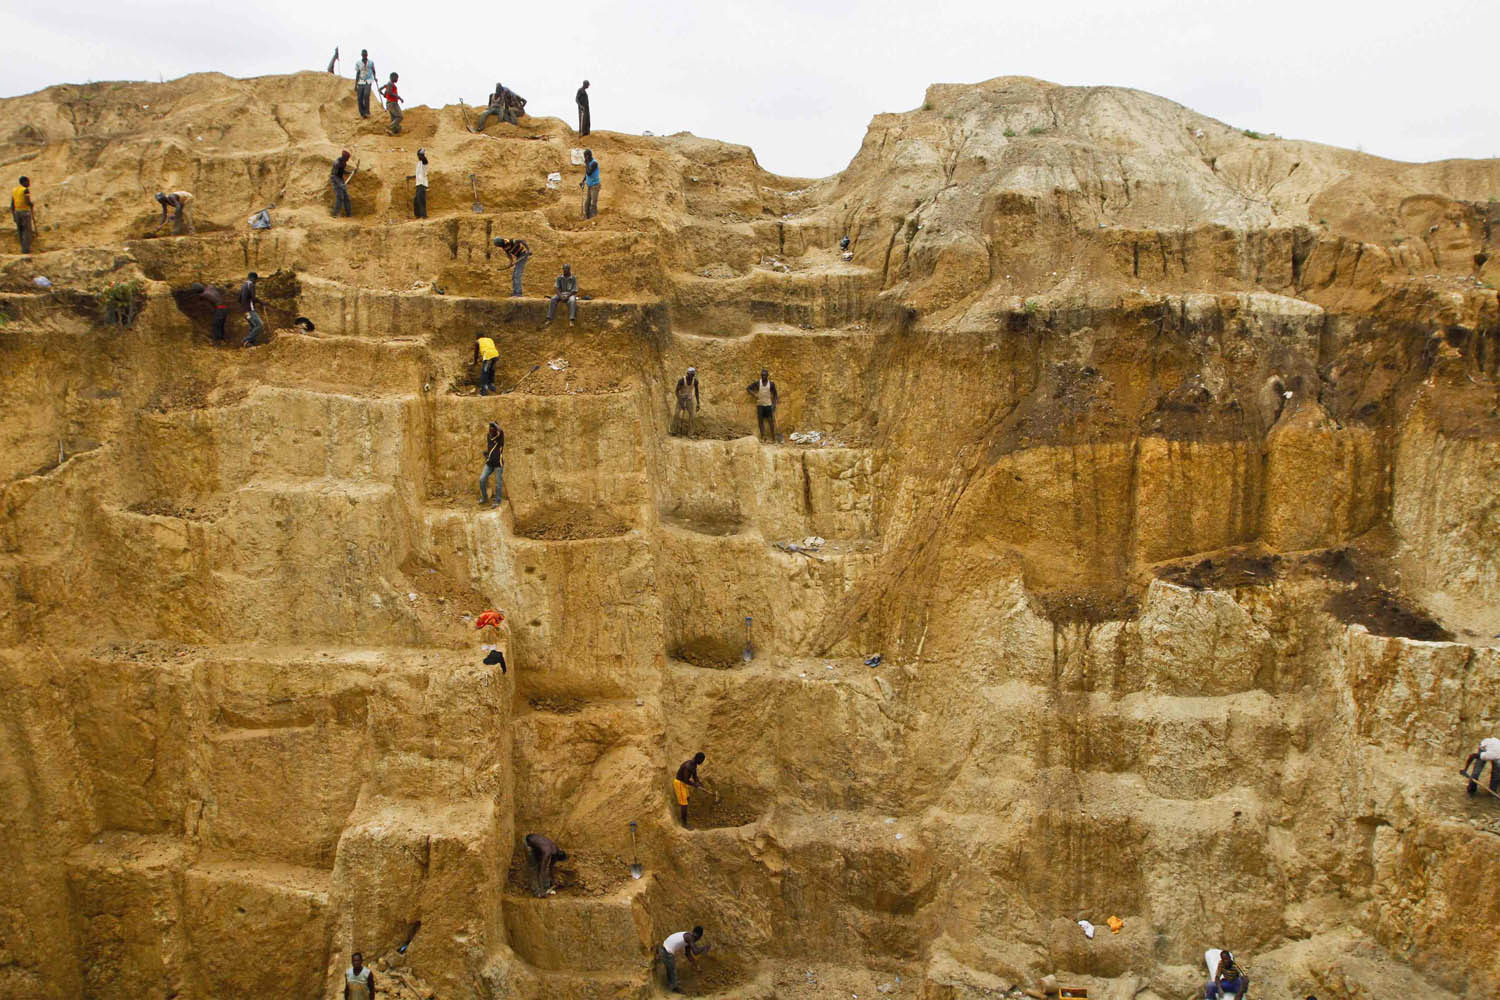 June 23, 2013. Laborers work on a mine believed to contain gold in Minna, Niger.